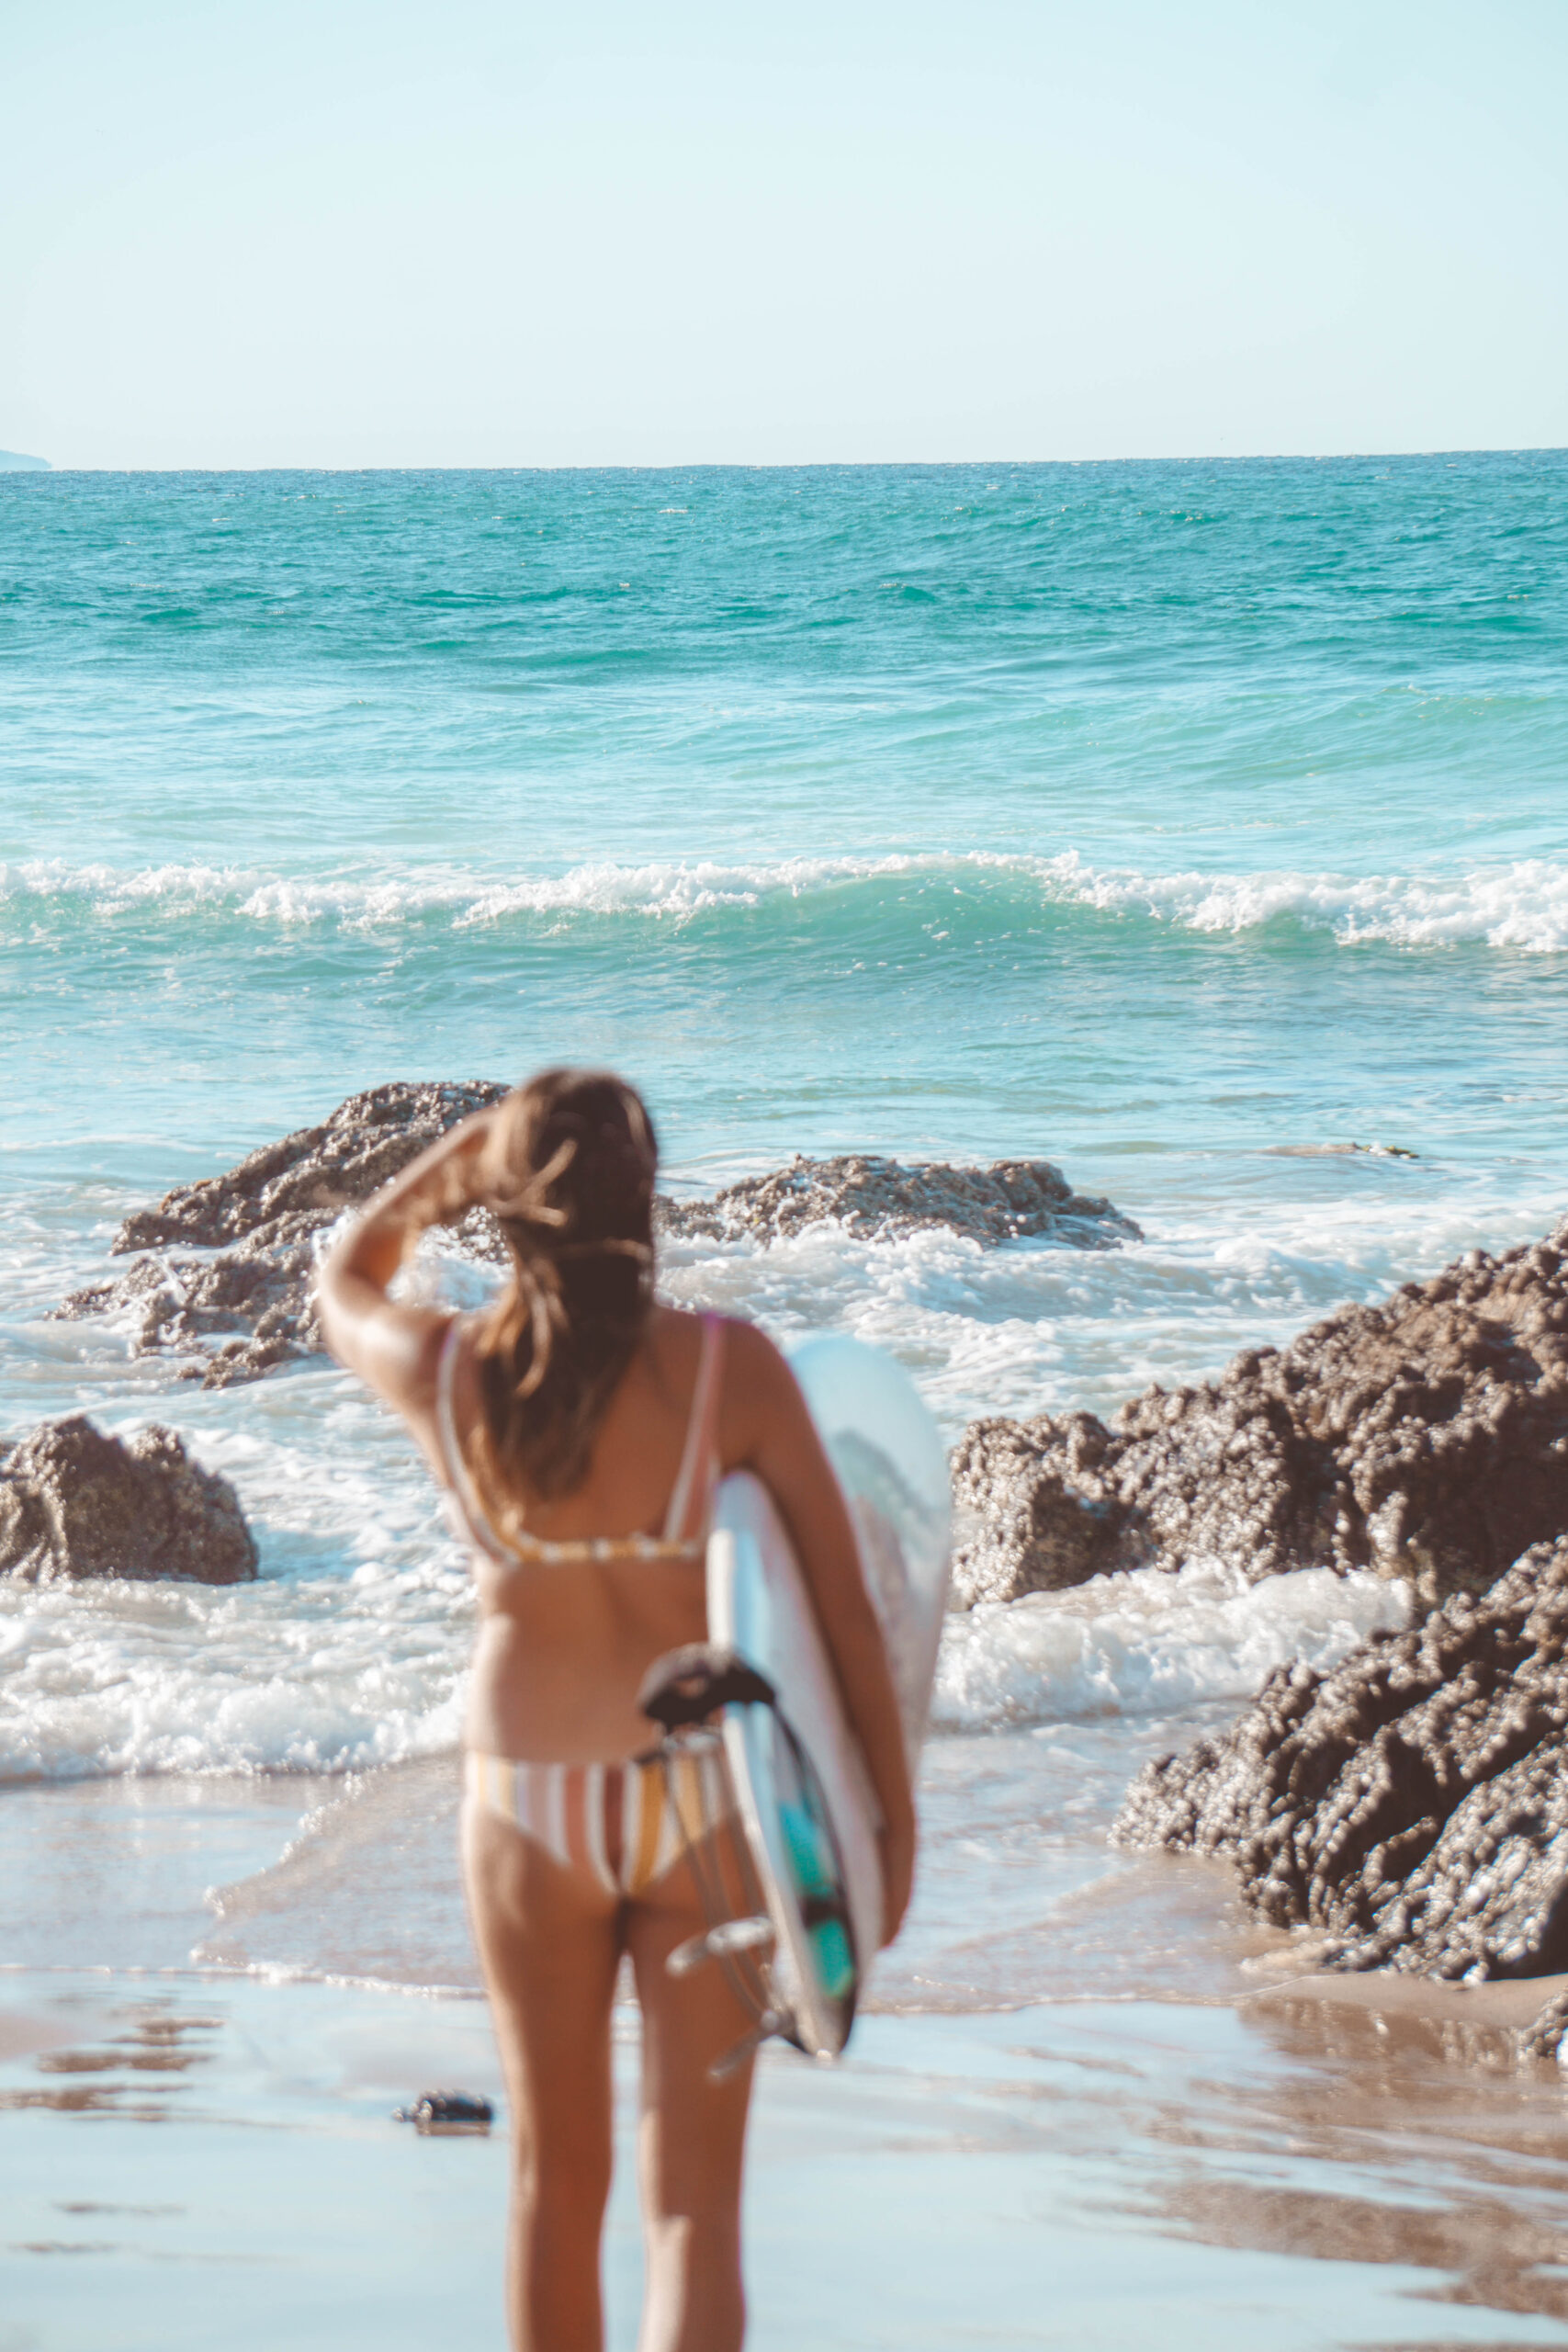 A surfer girls holds a surf board and looks out to the waves in Byron Bay